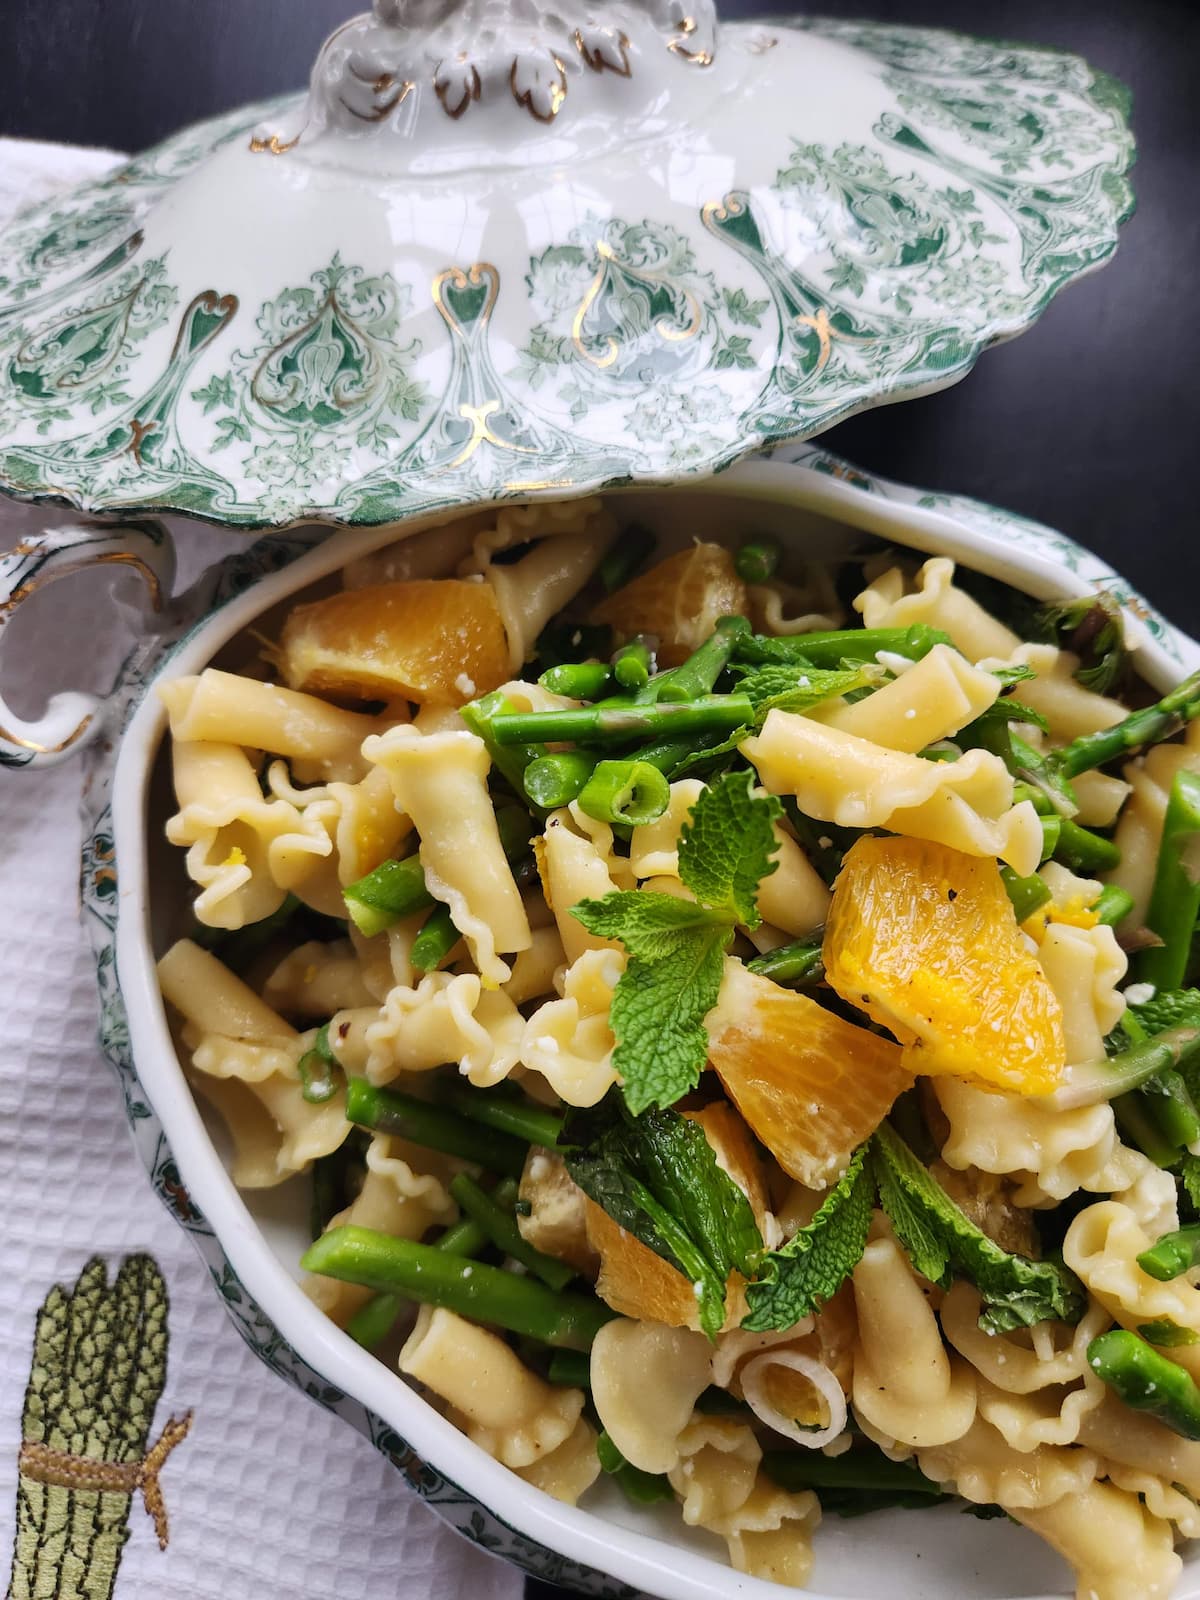 Best Easter Salad Recipe with Orange, Mint, and Asparagus